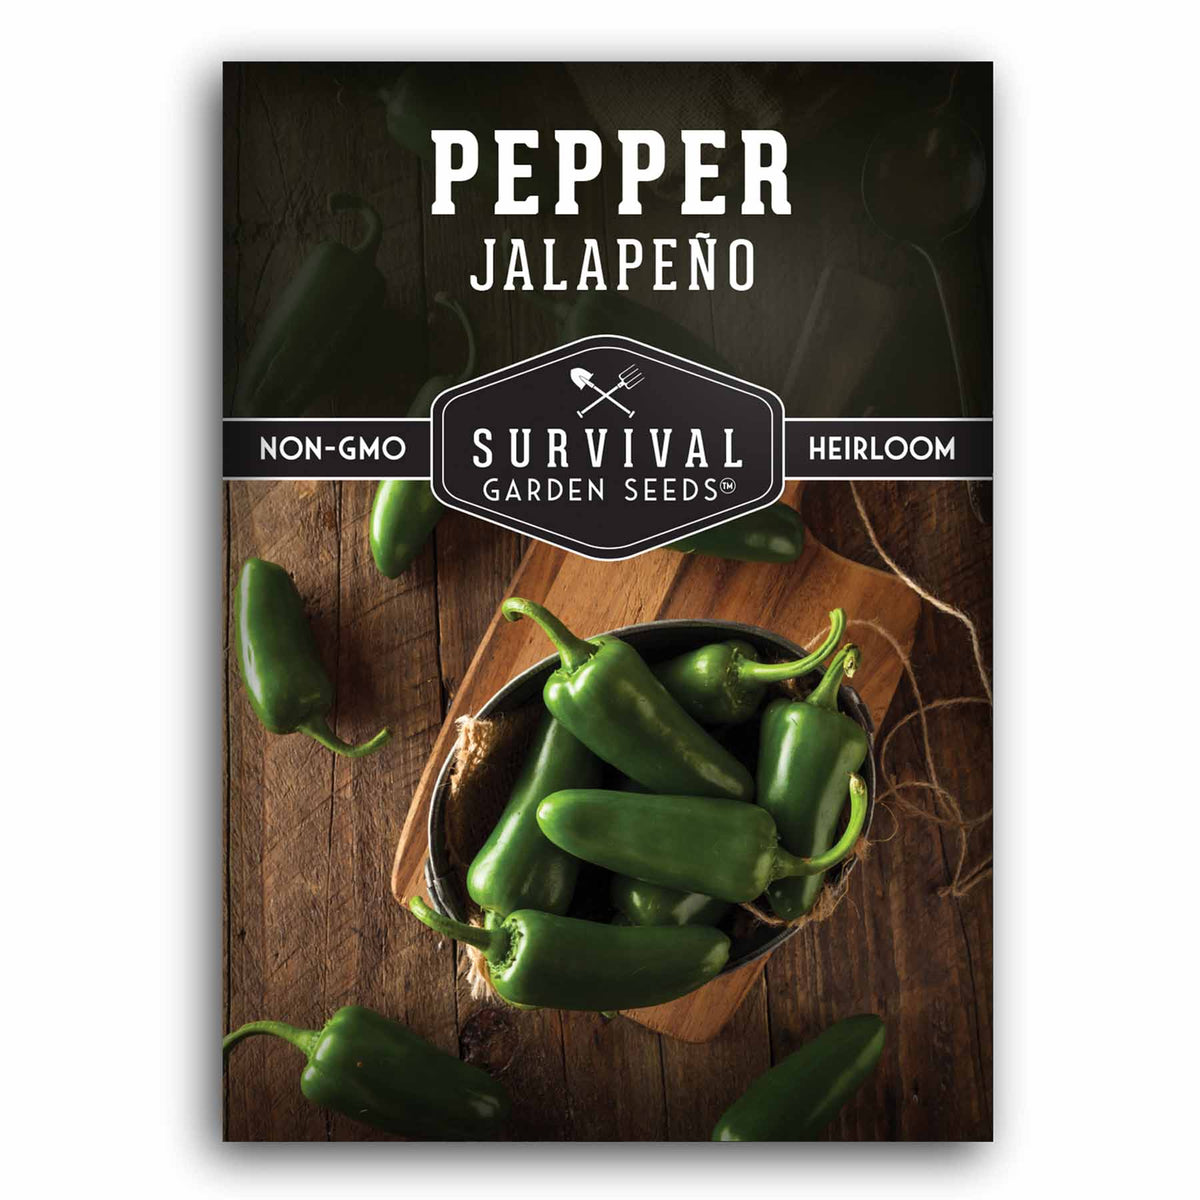 1 Packet of Jalapeno Pepper seeds